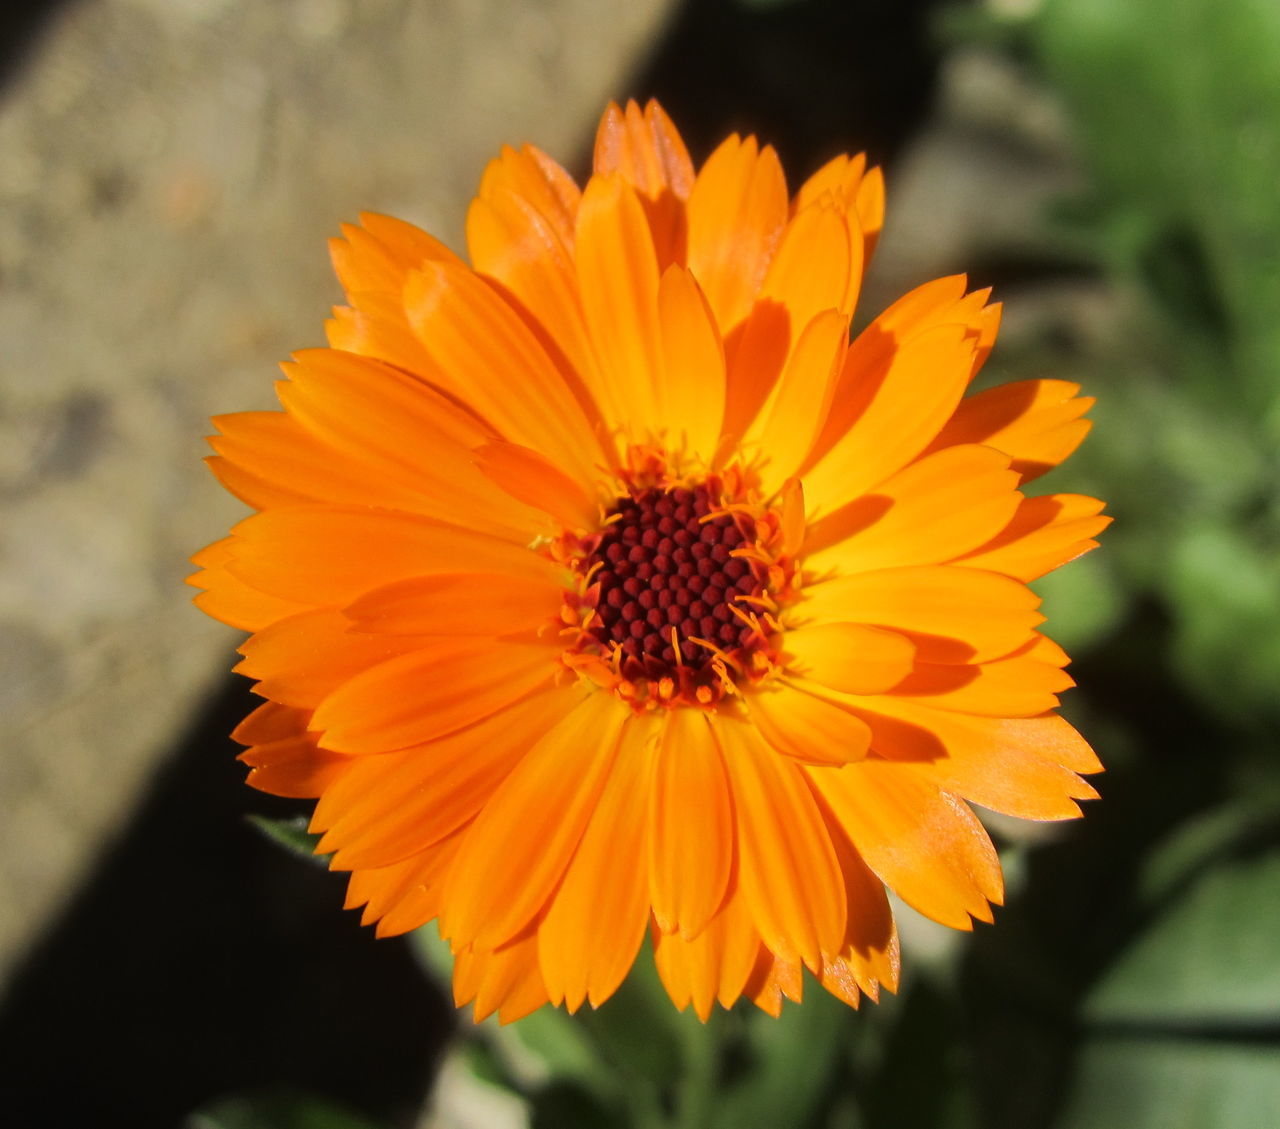 flower, flowering plant, plant, freshness, beauty in nature, flower head, yellow, nature, petal, close-up, calendula, growth, inflorescence, macro photography, orange color, fragility, no people, herb, sunlight, focus on foreground, landscape, outdoors, pollen, summer, botany, rural scene, day, vibrant color, land, wildflower, plant stem, selective focus, blossom, environment, multi colored